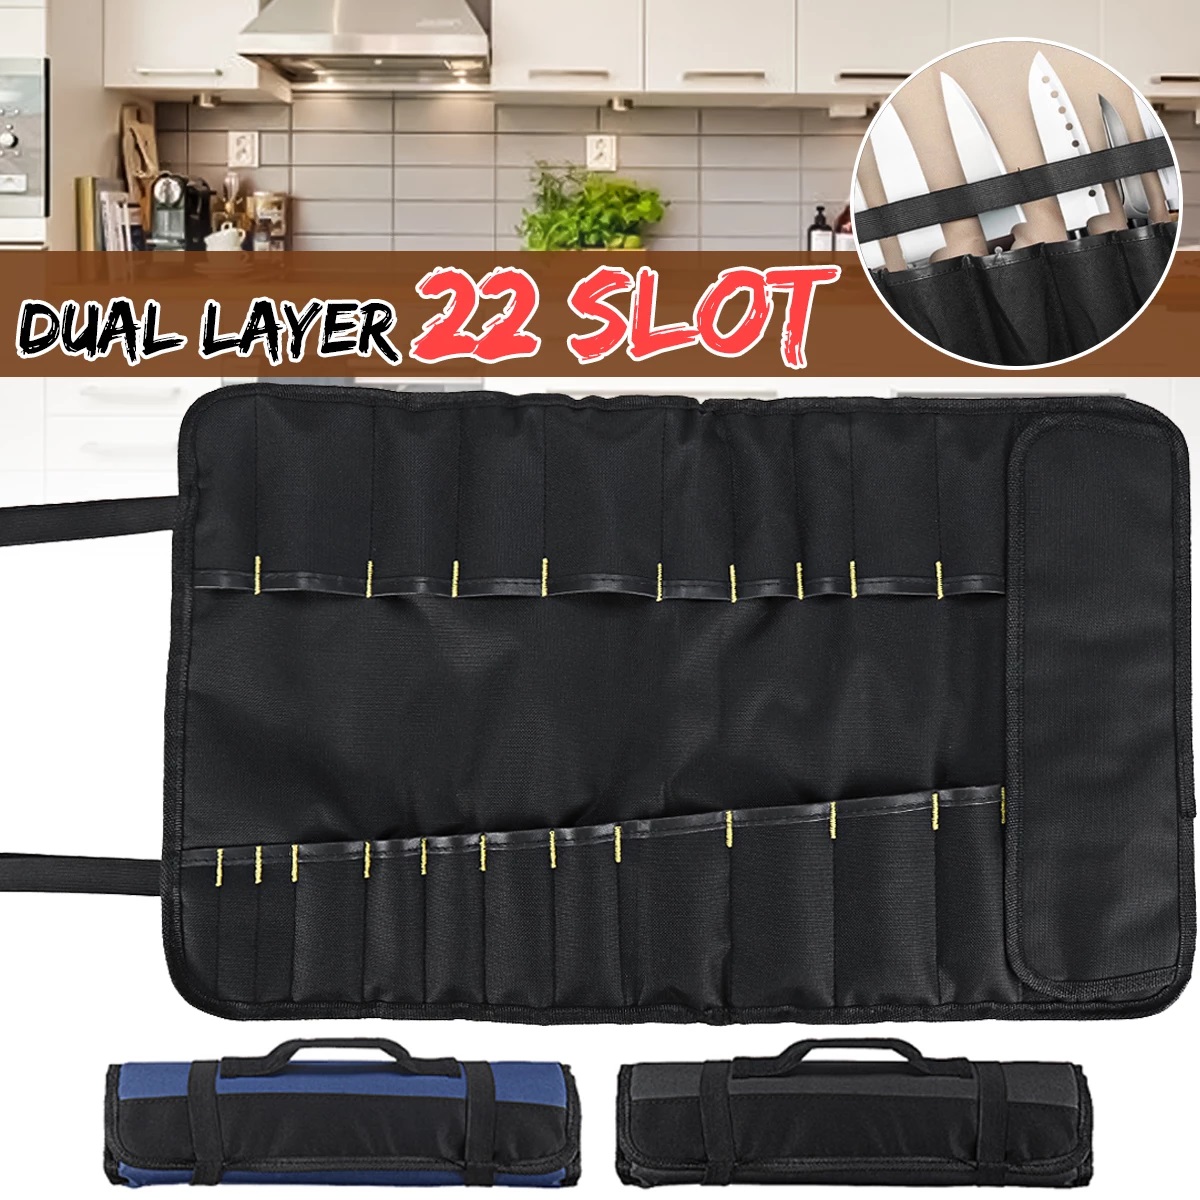 Roll Knife Bag Kitchen Cooking Multifunction Portable Kitchen Tool Accessories Durable Storage Carry Case Bag Chef Knife Bag